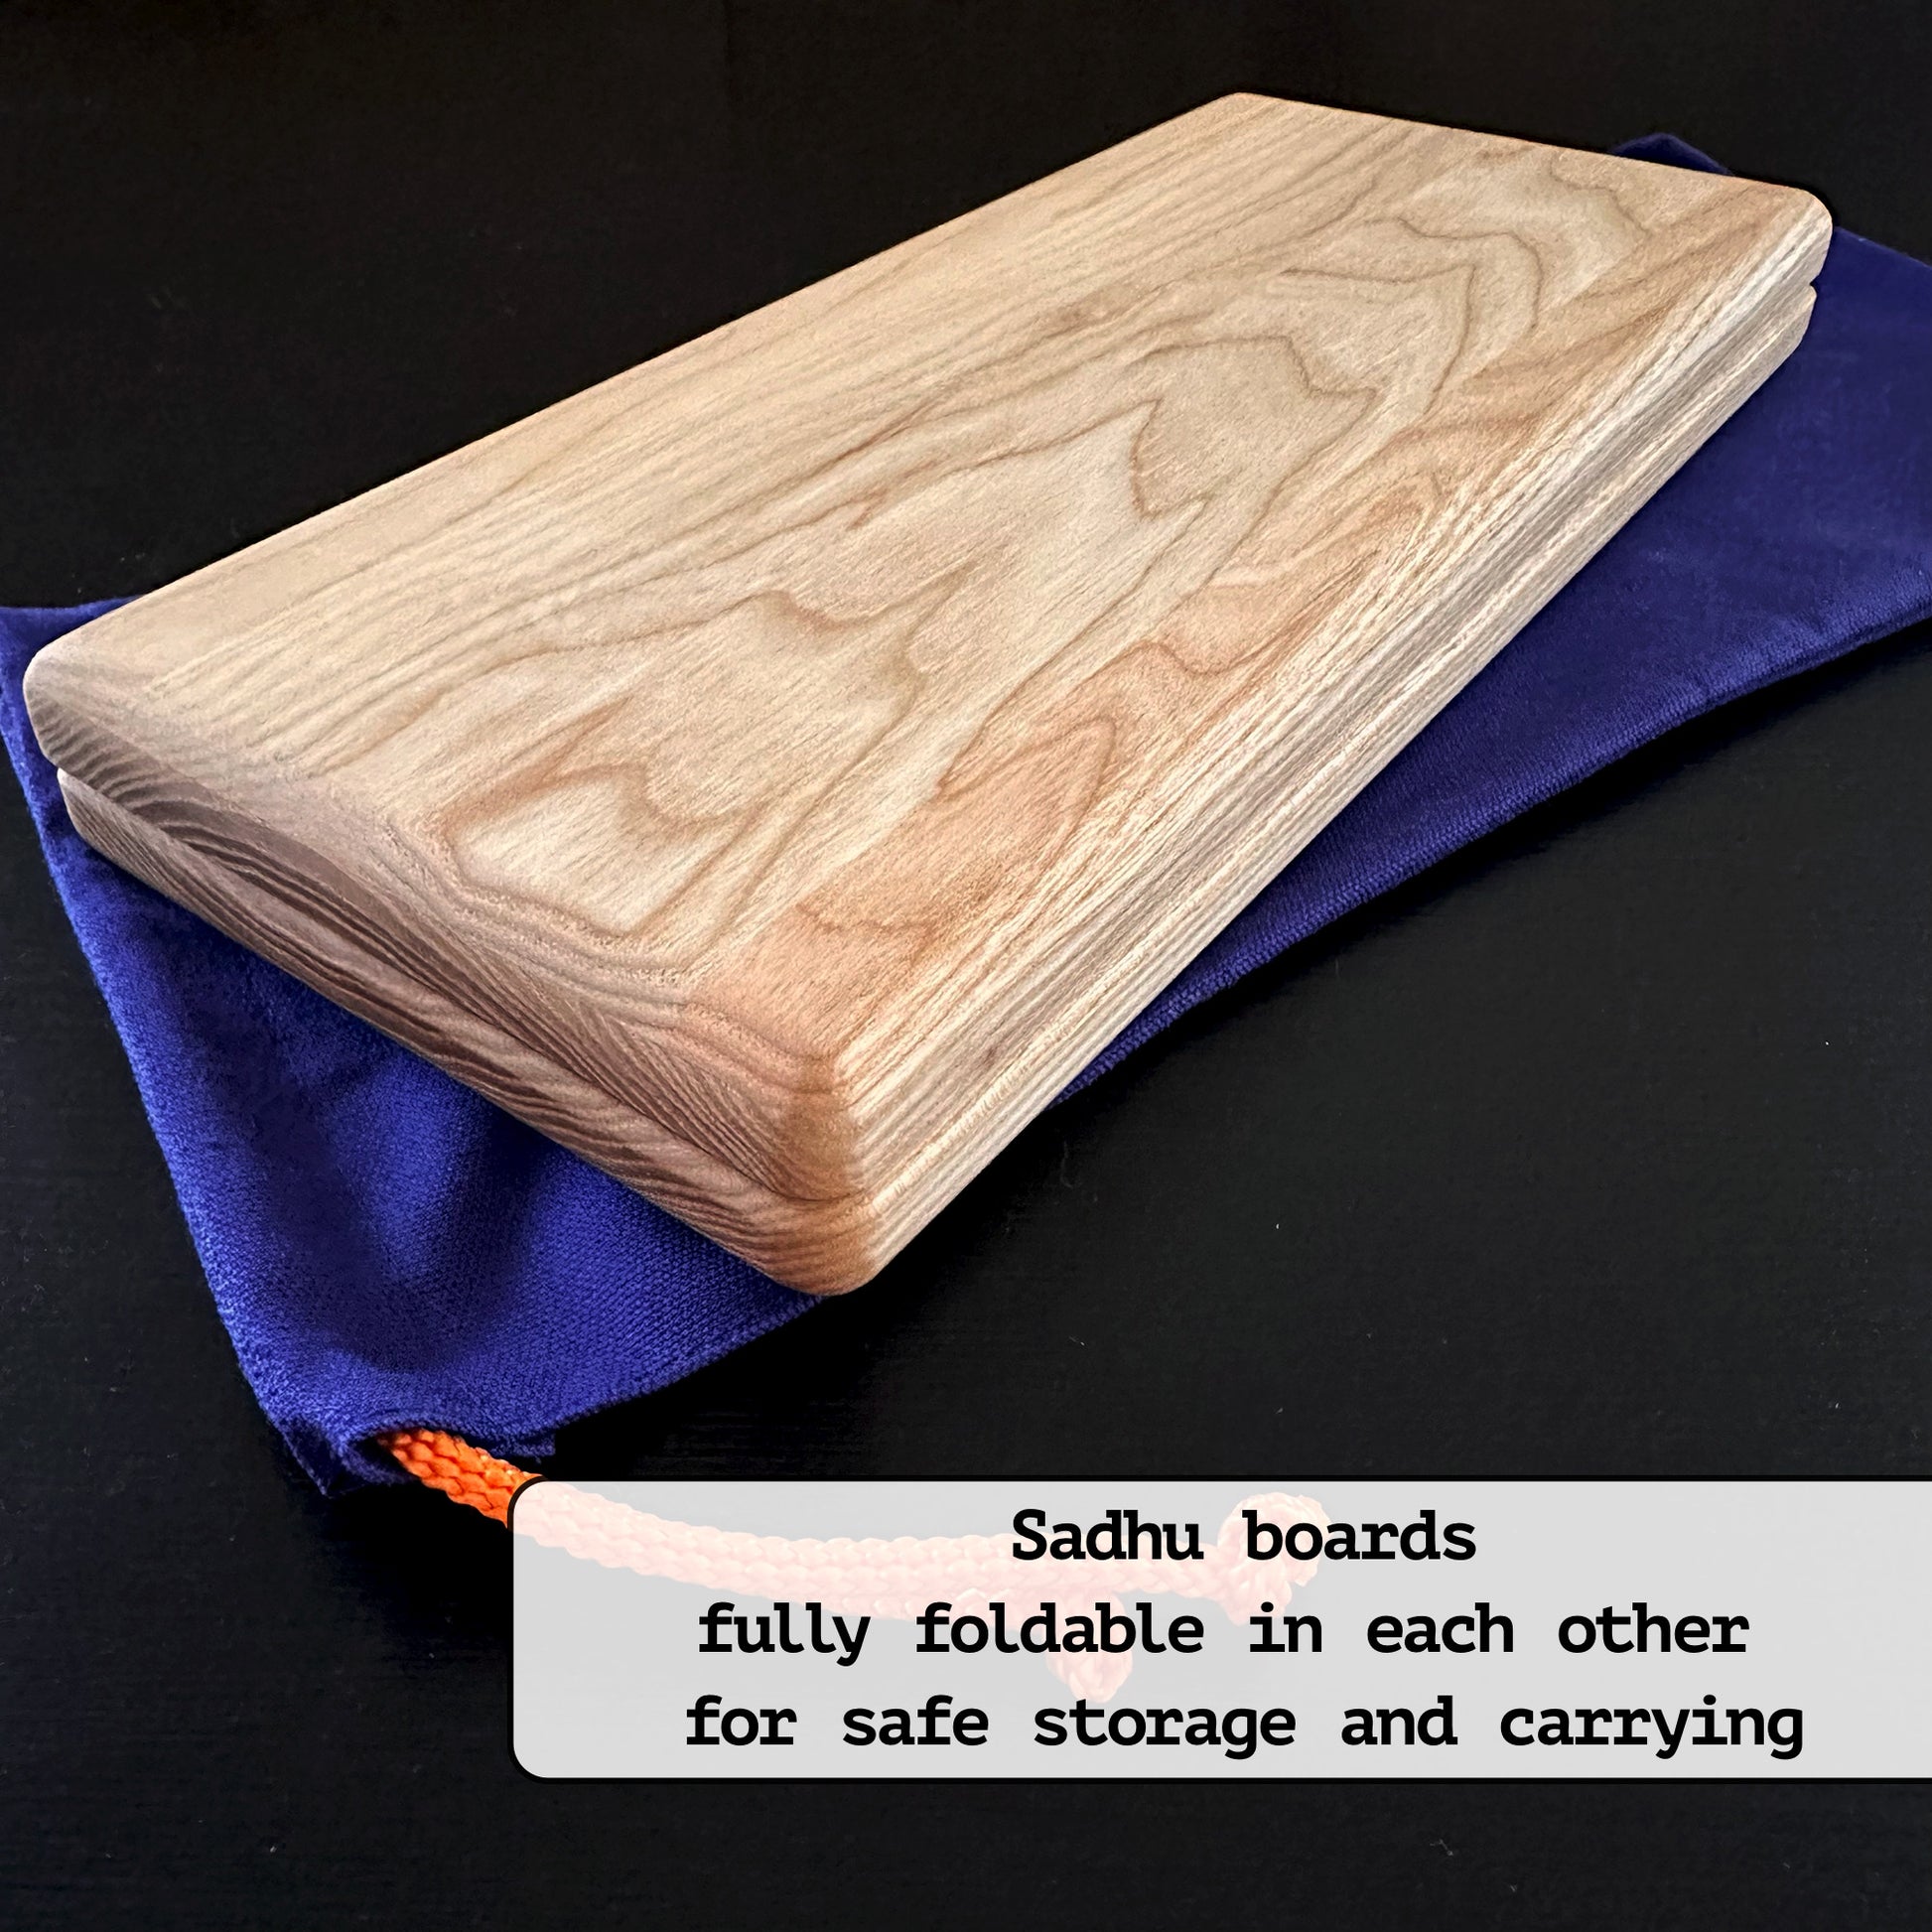 ash wood sadhu board folded into each other with violet pouch